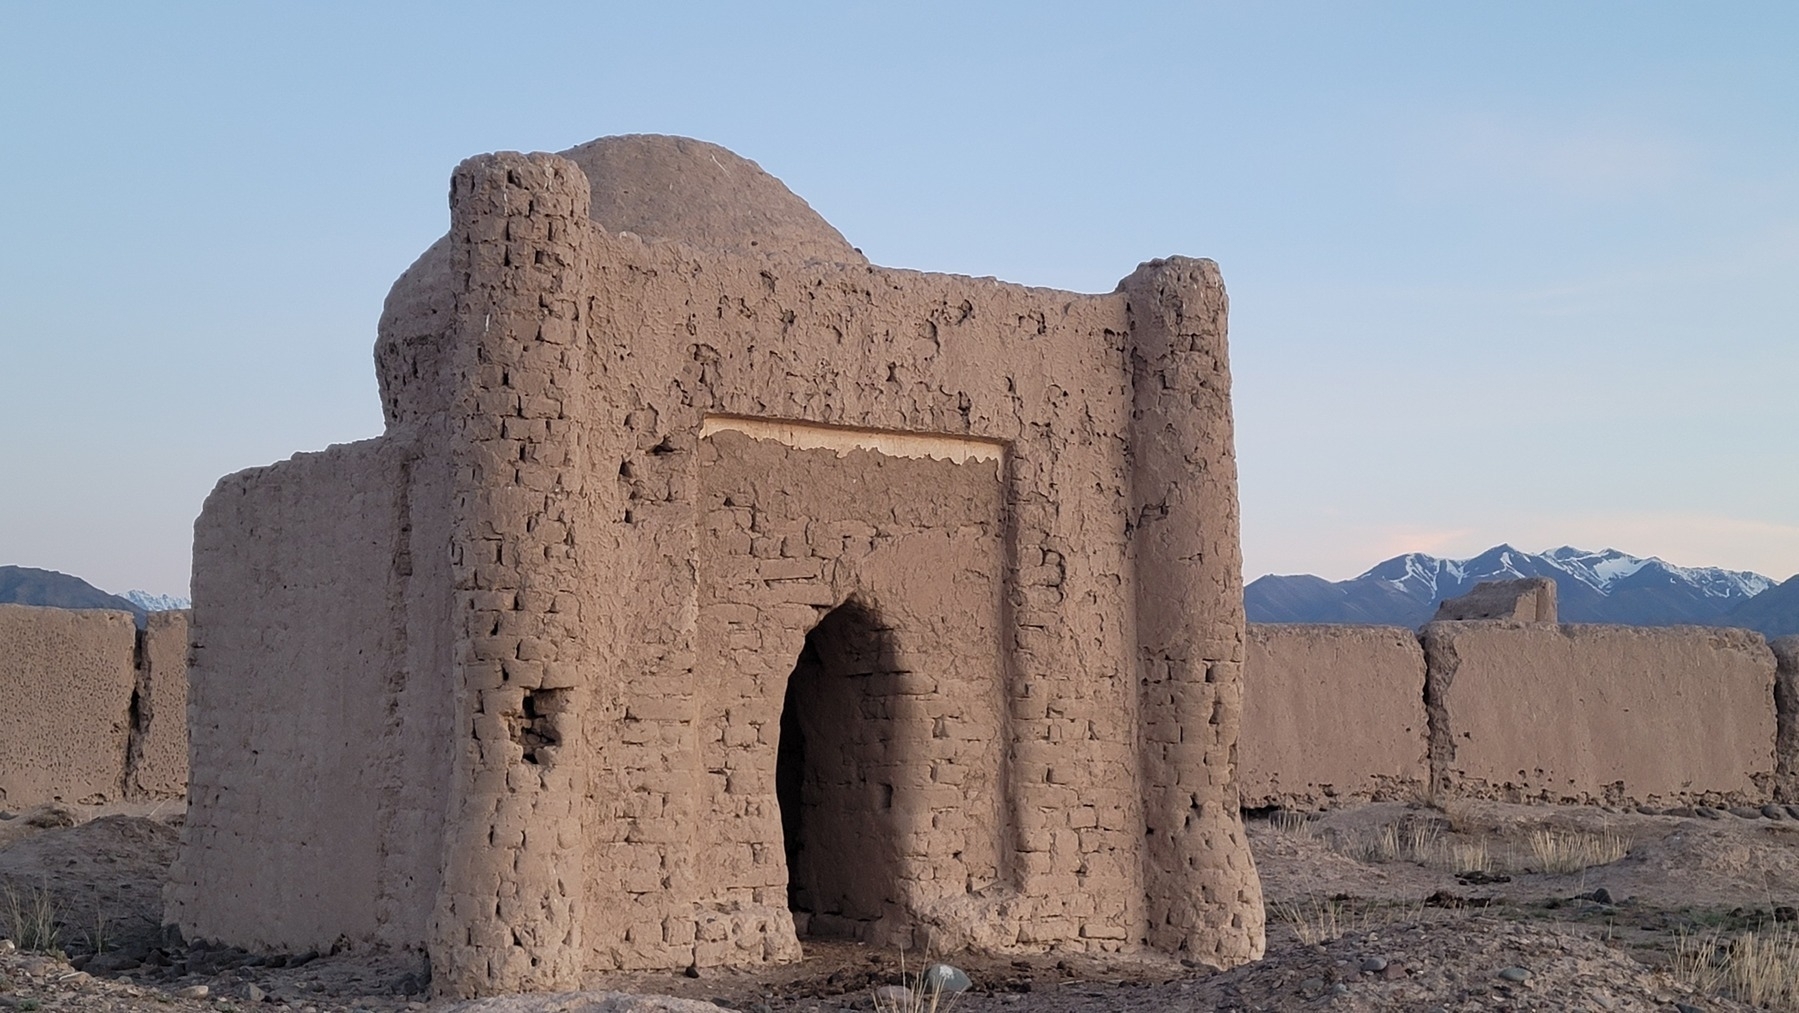 small ancient-looking building made of brown stone/clay(?) with a small domed roof and, a slightly higher wall in front with columns on the right and left sides. wall of a small enclosure made of the same material visible behind, and snow-capped mountains behind that